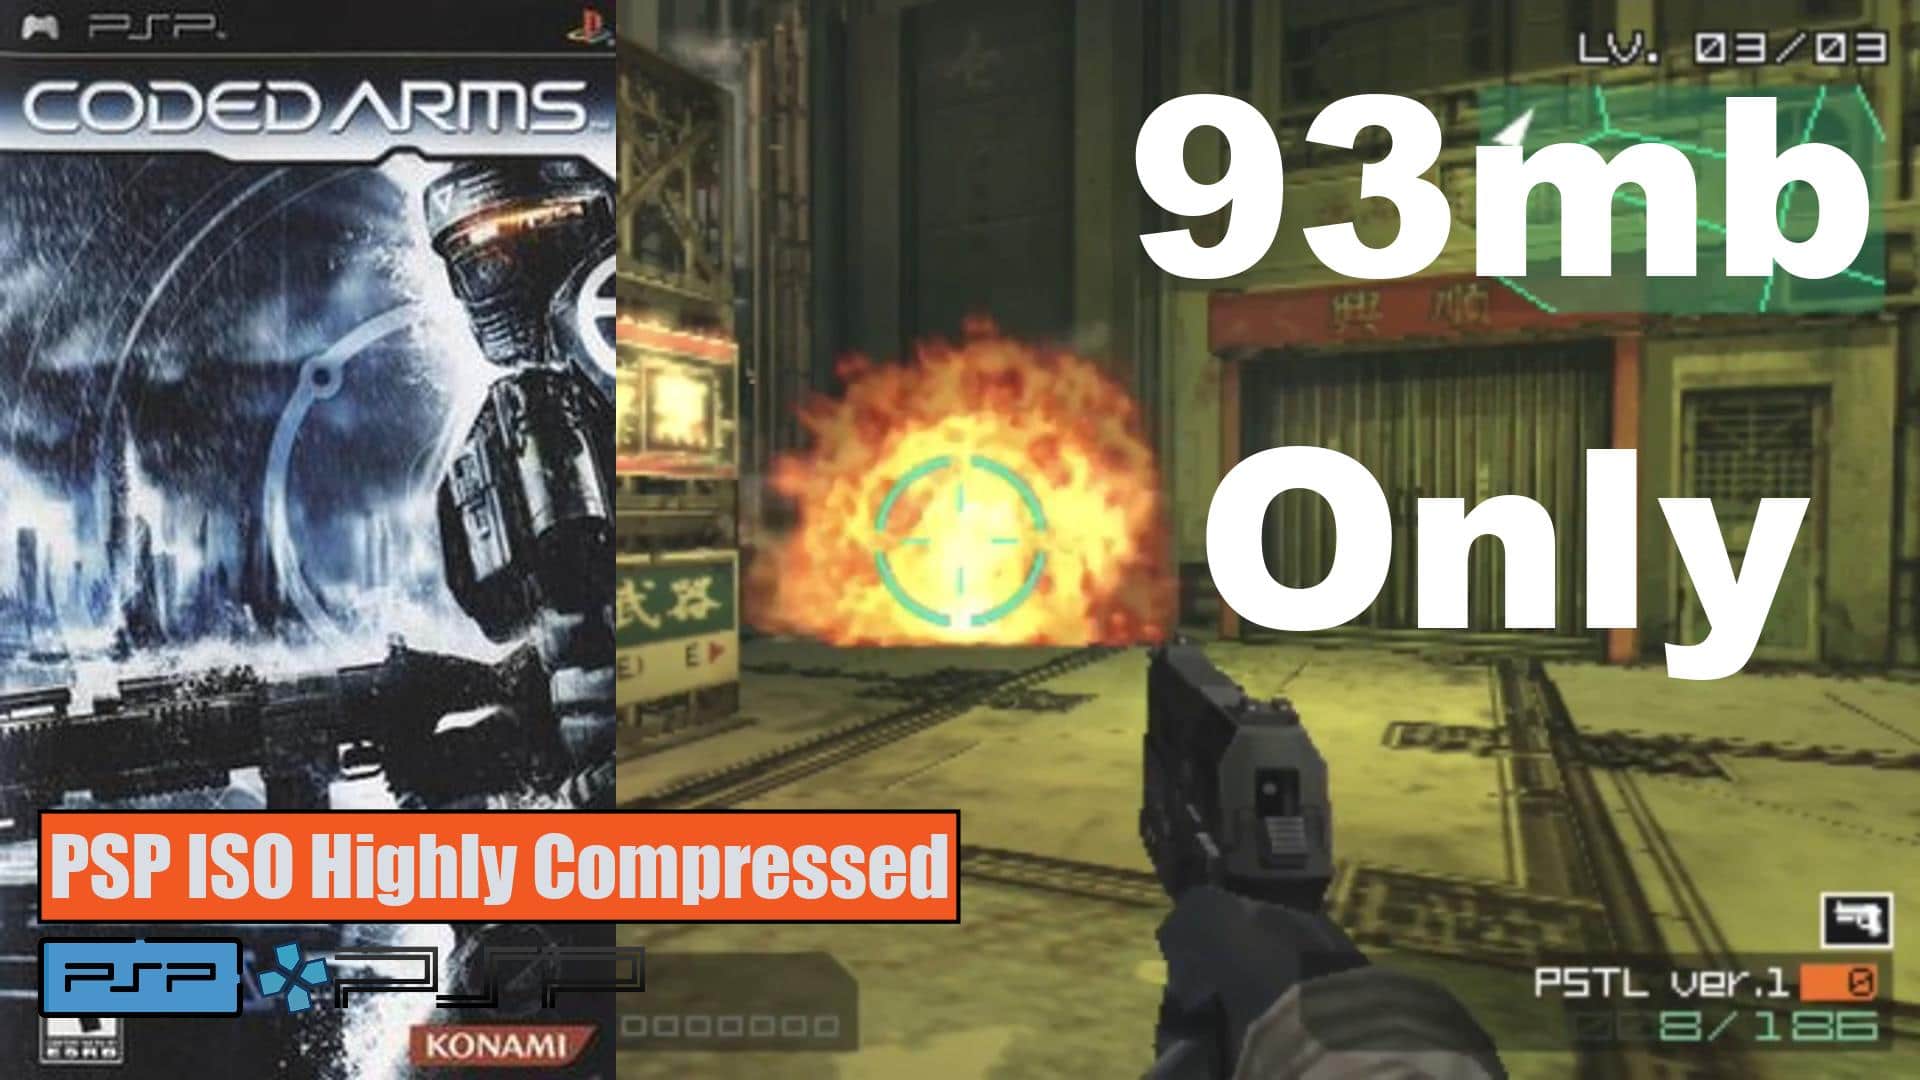 Coded Arms PSP ISO Highly Compressed